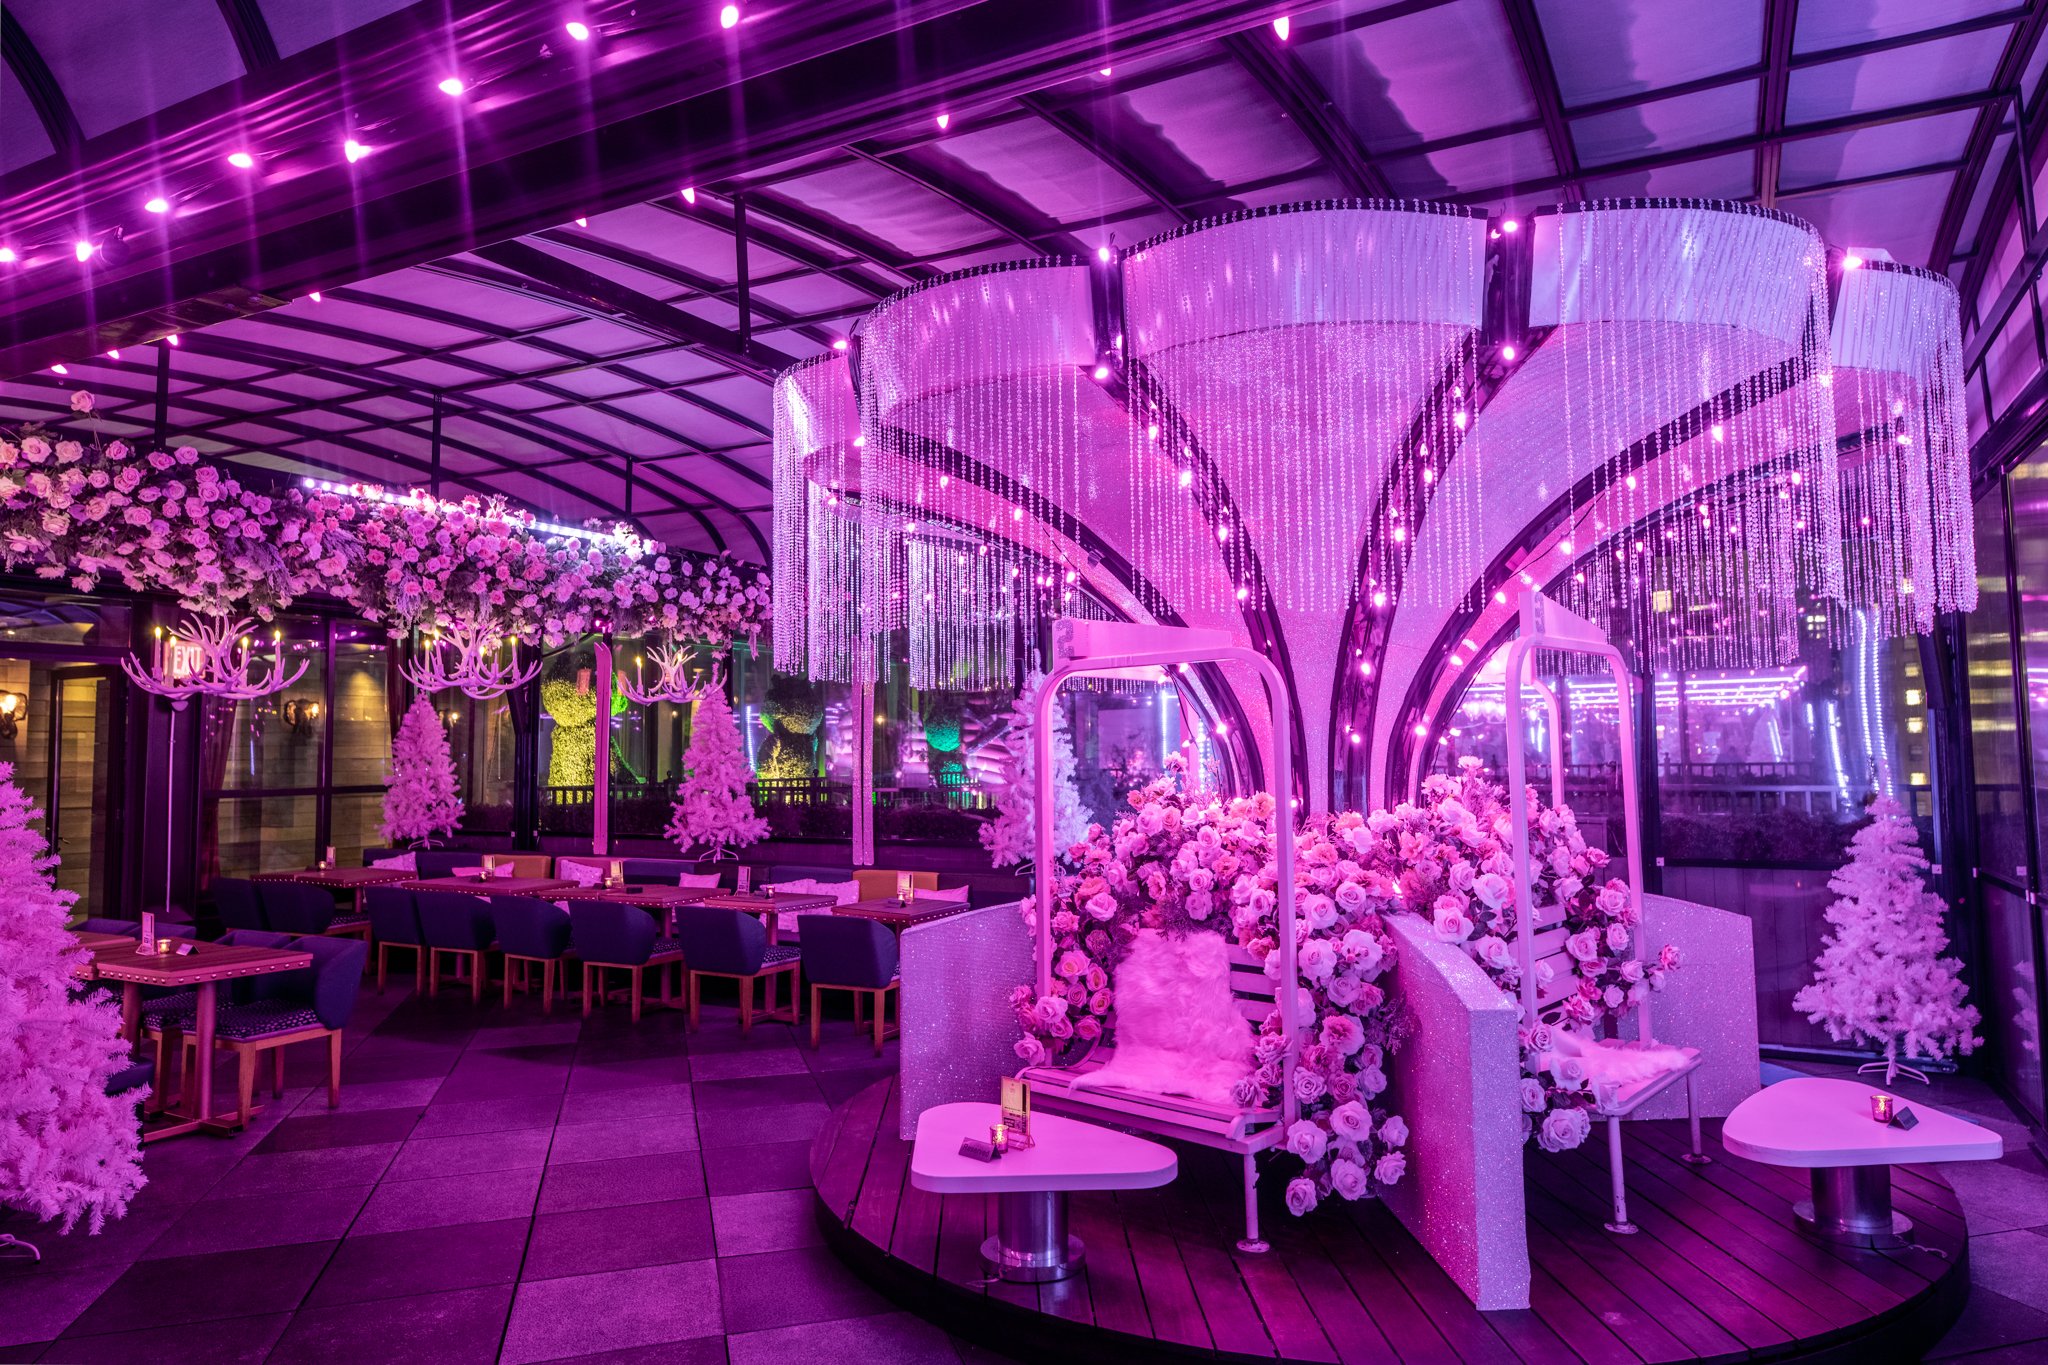  Manhattan’s ‘ it’ &nbsp;rooftop bar and lounge -- known for their much-anticipated holiday installs season after season -- is celebrating sky-high eating and drinking this season with a new apres-ski holiday pop-up on November 19th -- bigger and bet